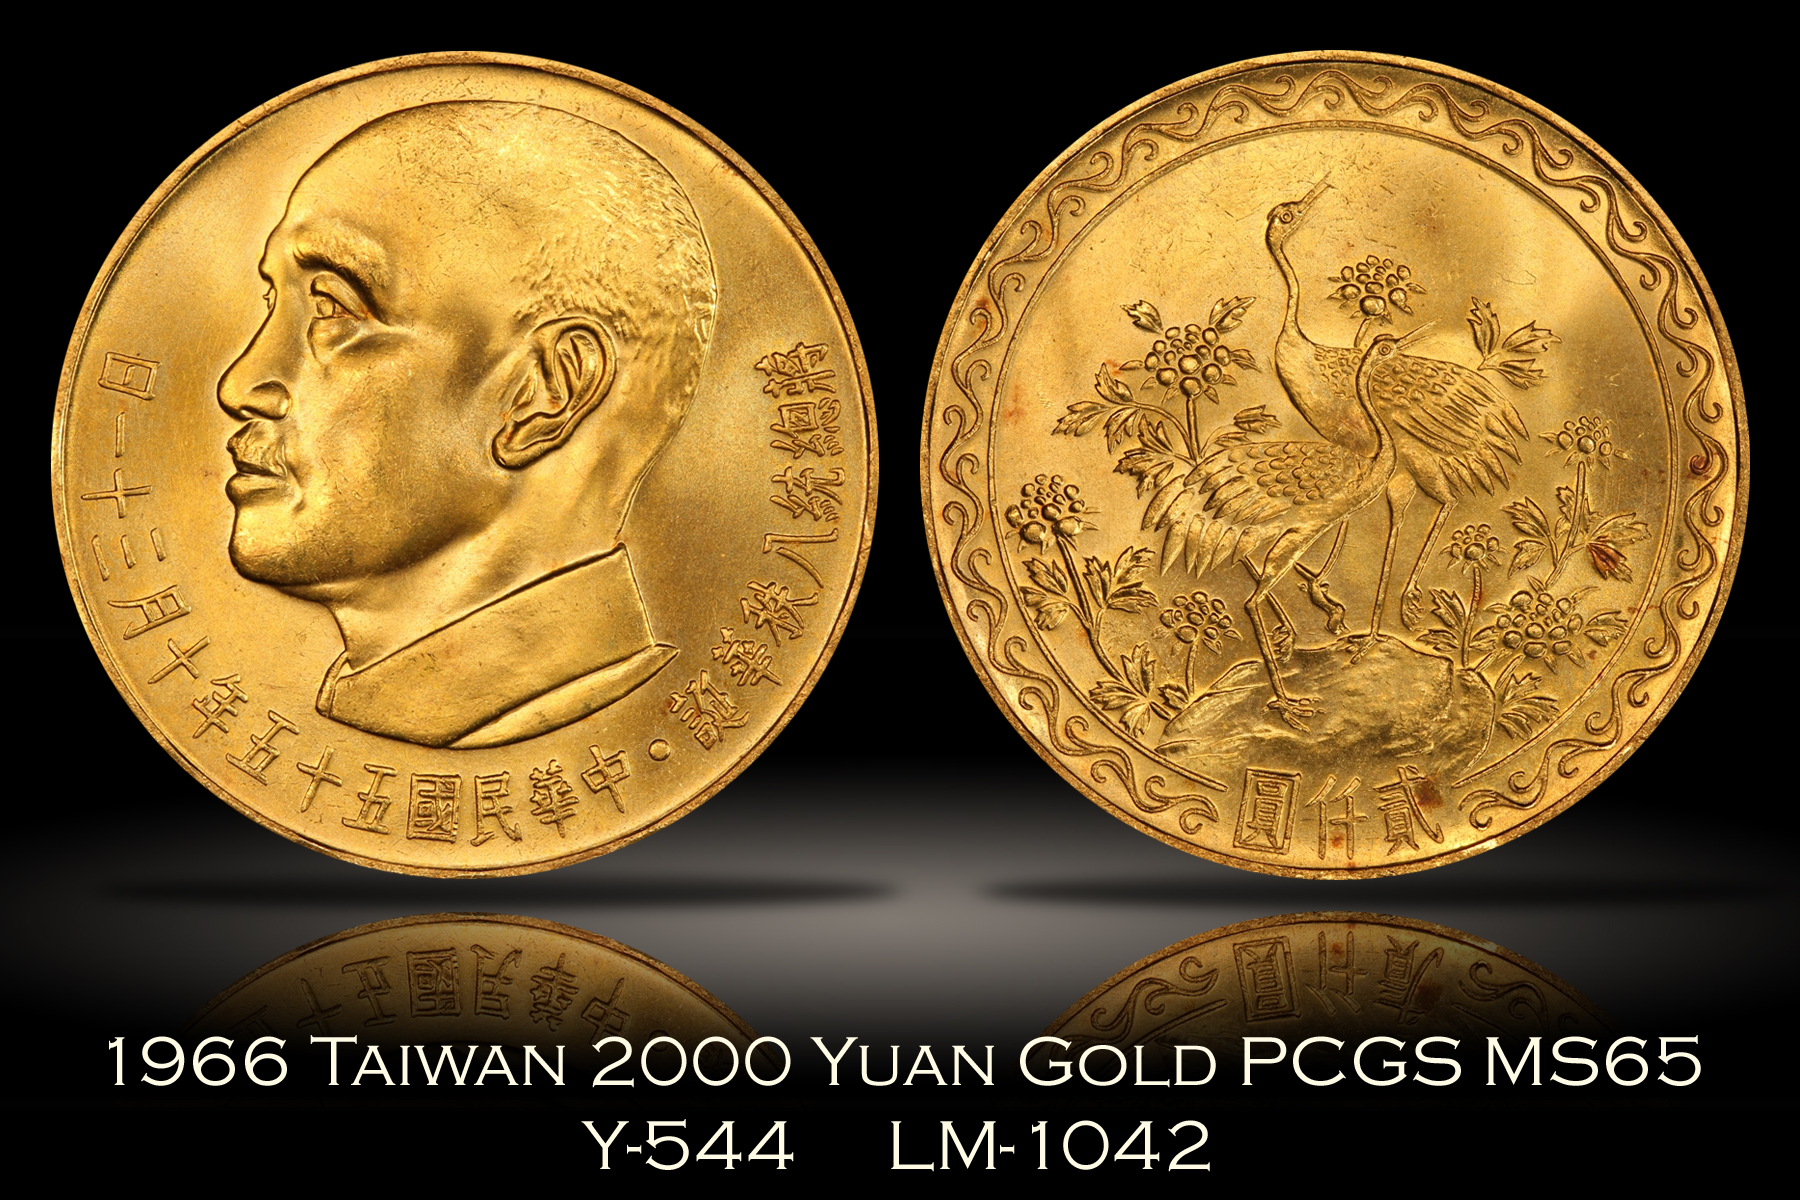 1966 Taiwan 2000 Yuan Gold Y-544 LM-1042 PCGS MS65